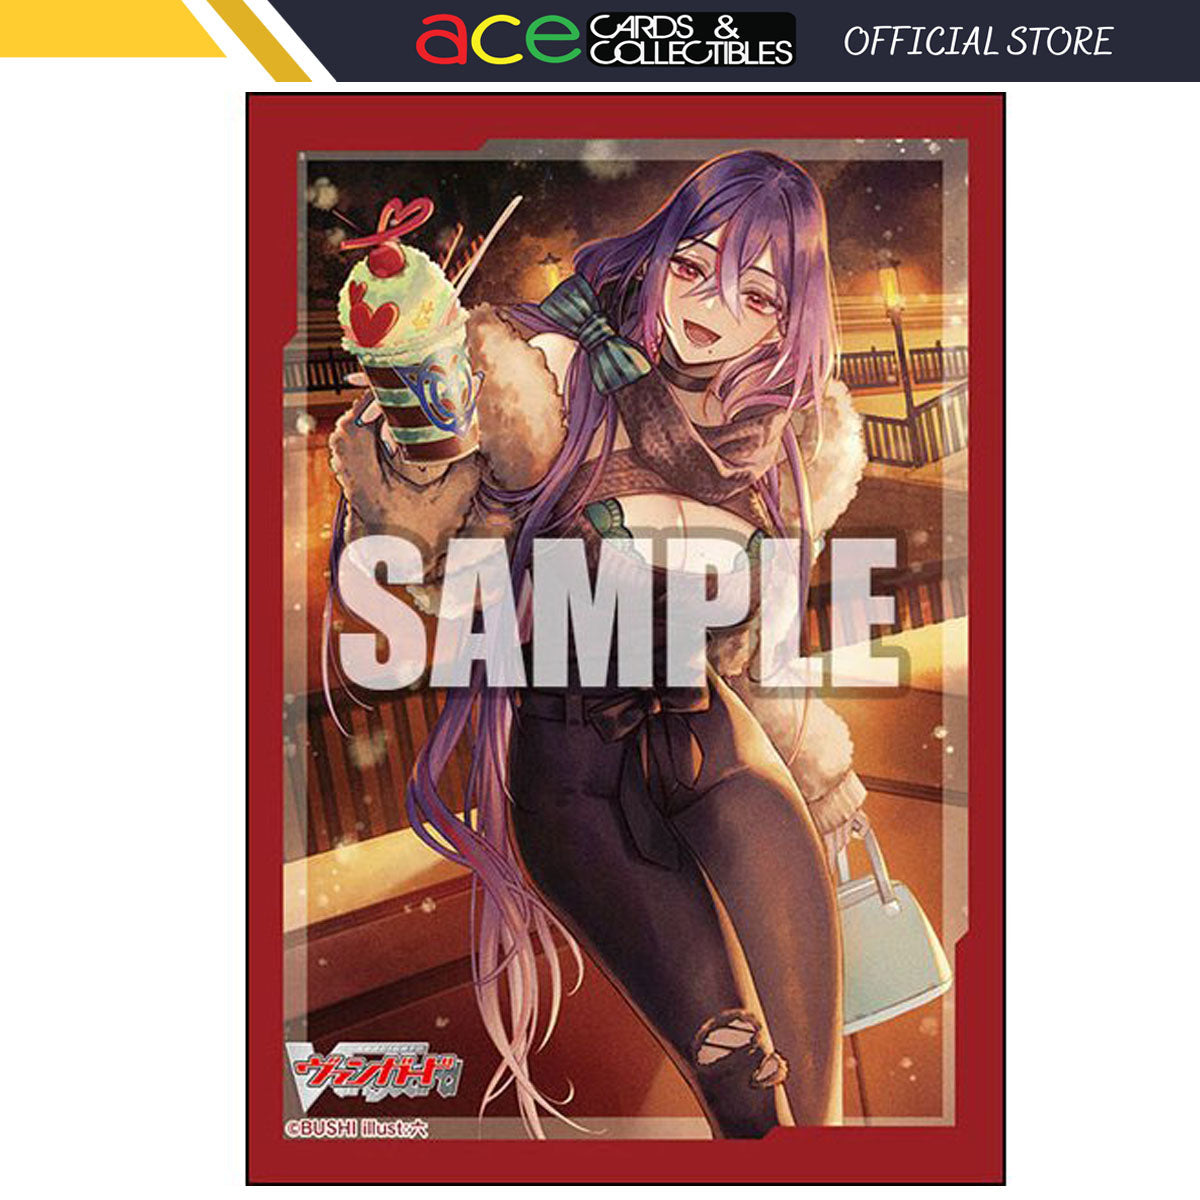 CardFight Vanguard OverDress Sleeve Collection Mini Vol. 599 "Coming Beauty, Herminia"-Bushiroad-Ace Cards & Collectibles